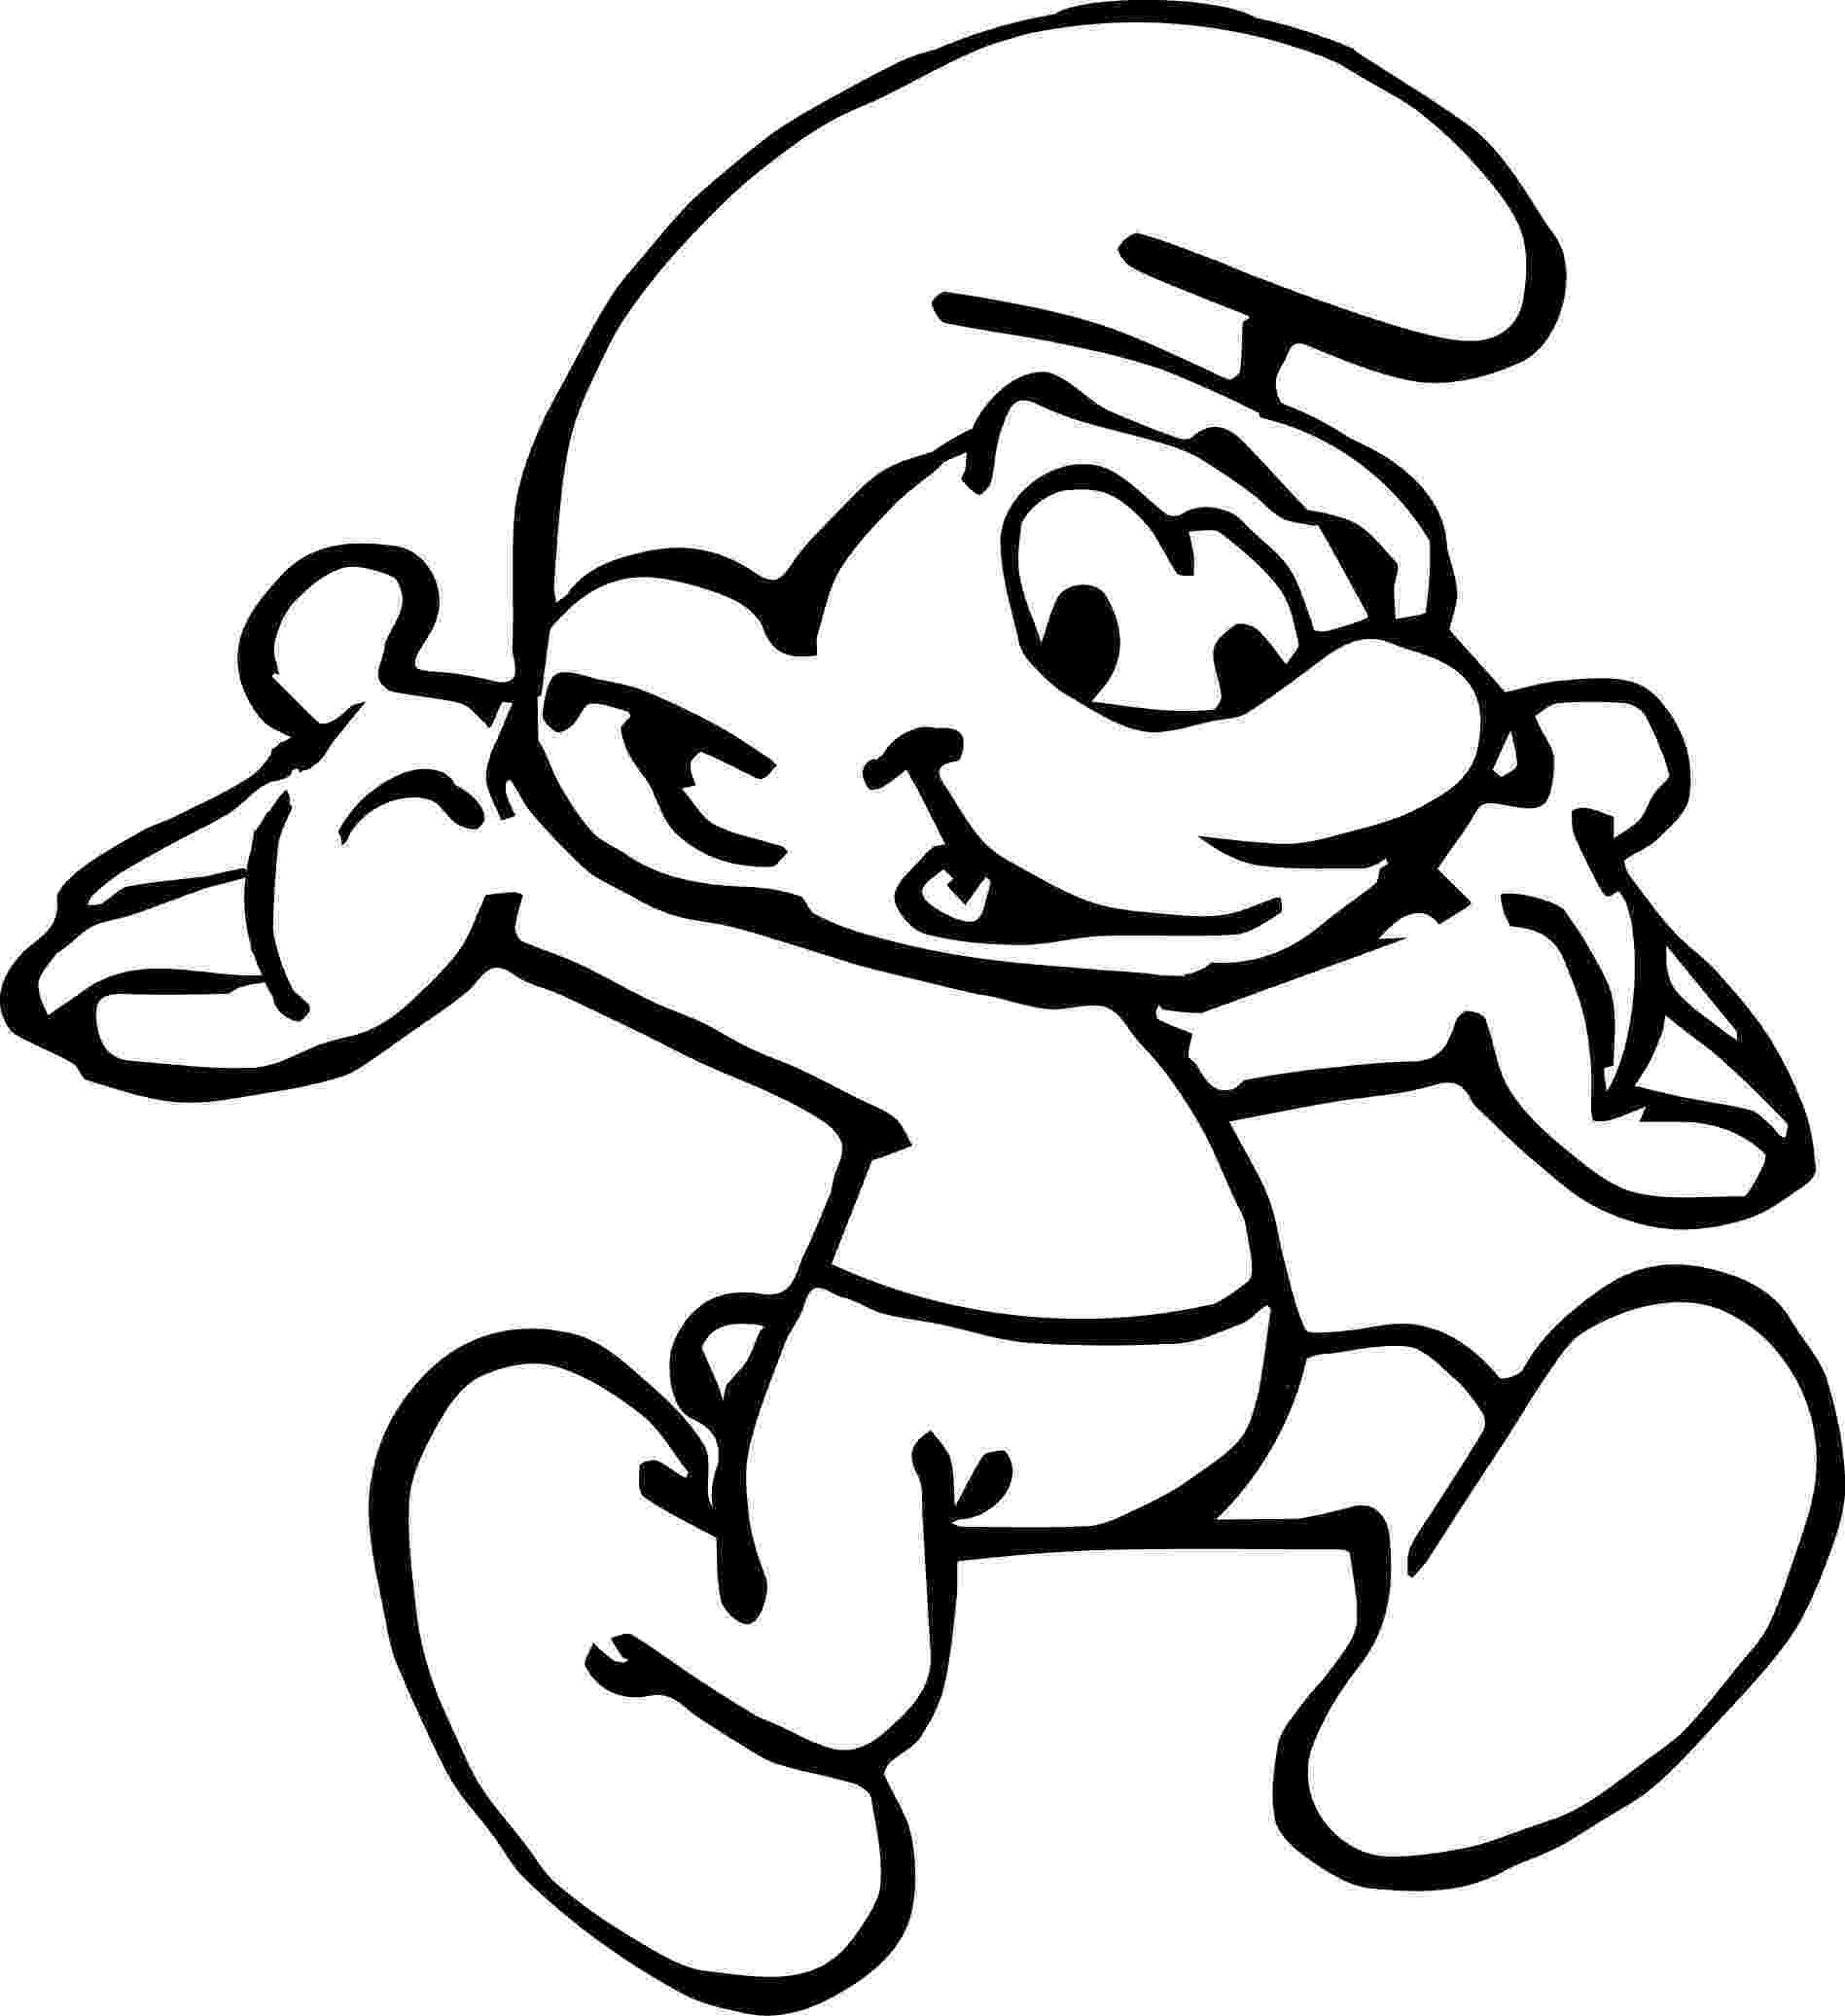 smurf pictures jokey smurf coloring pages smurf pictures 